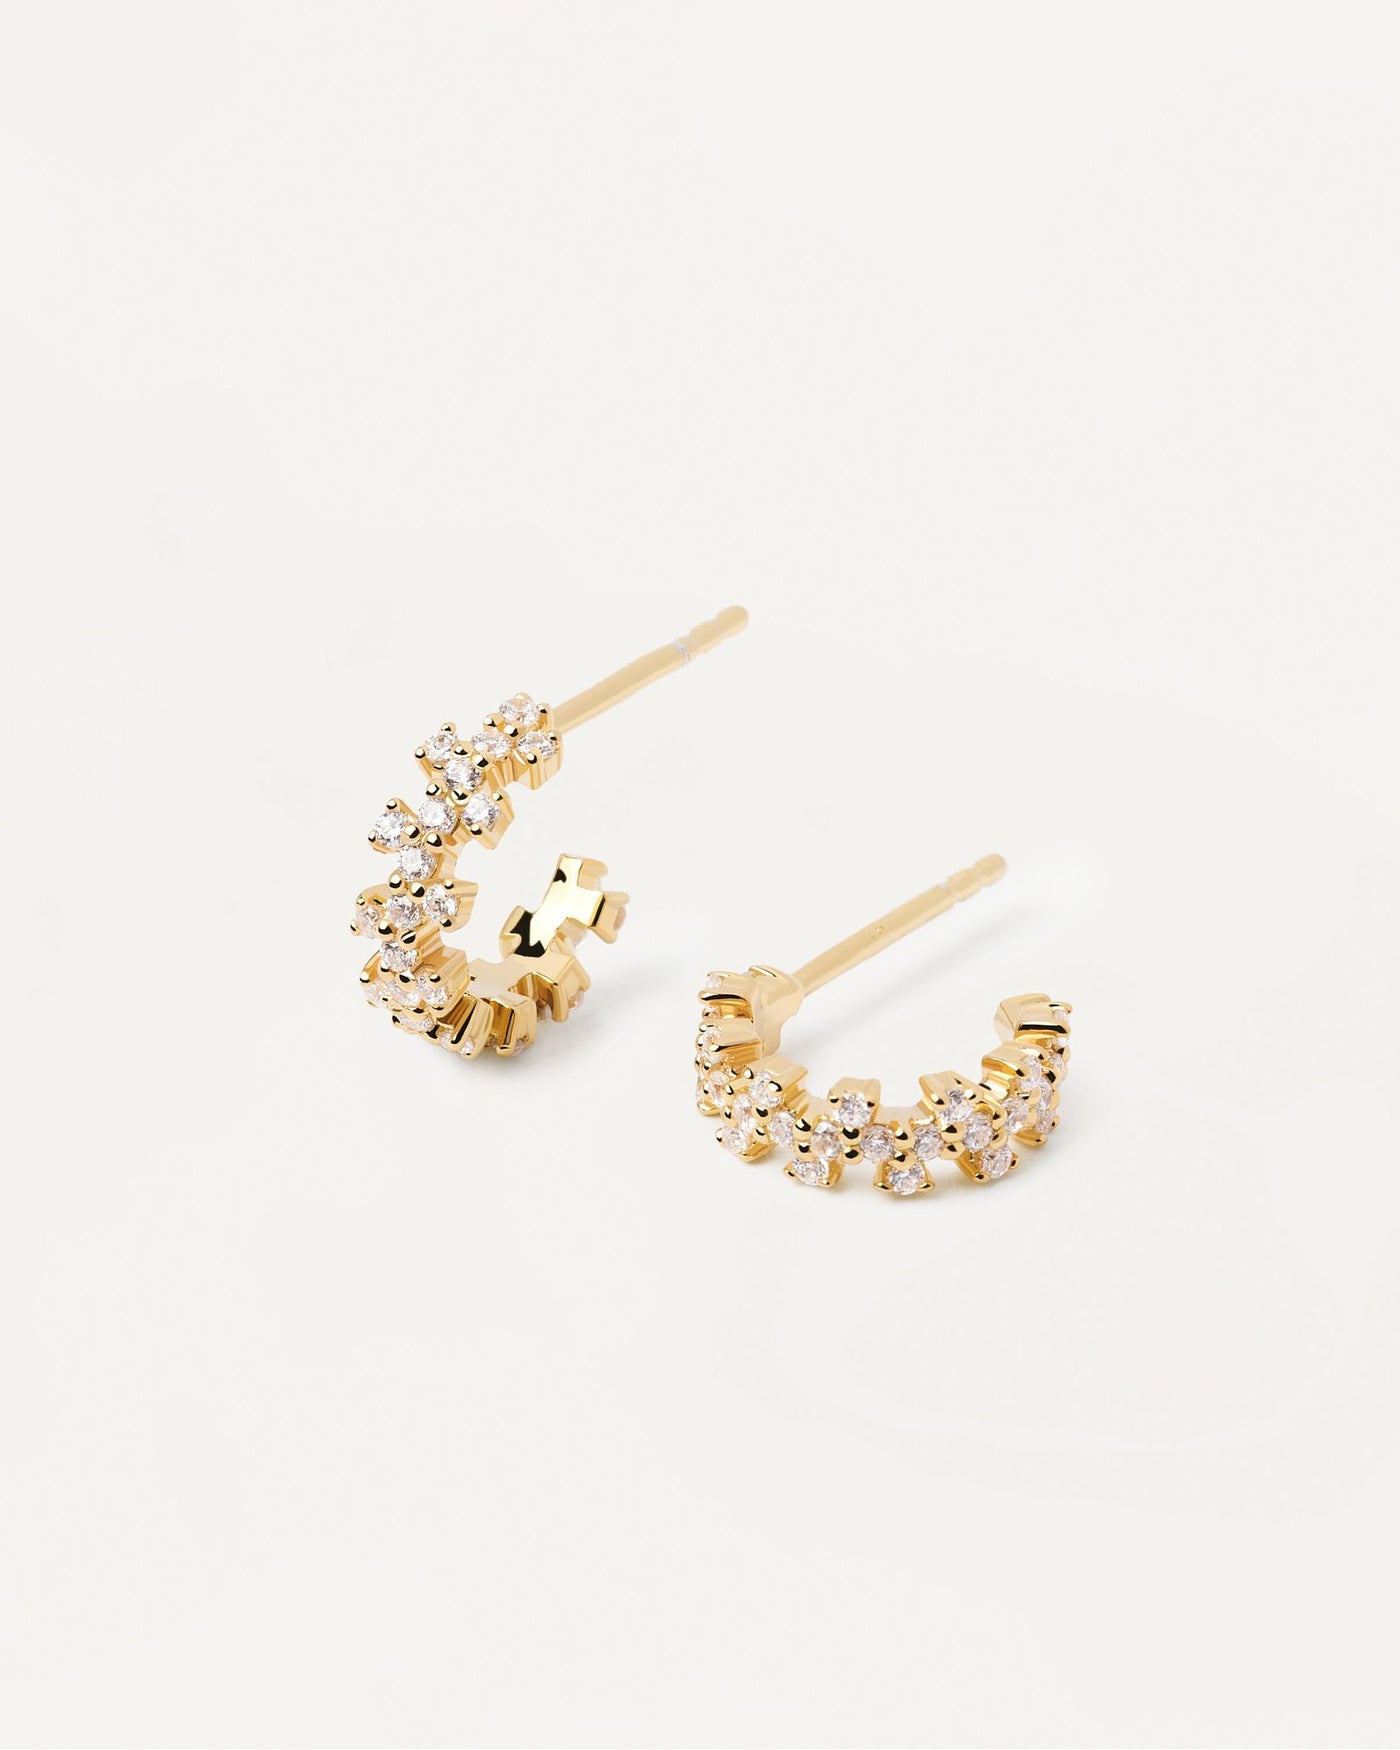 2024 Selection | Little Crown Earrings. Gold-plated small hoops with white zirconia. Get the latest arrival from PDPAOLA. Place your order safely and get this Best Seller. Free Shipping.